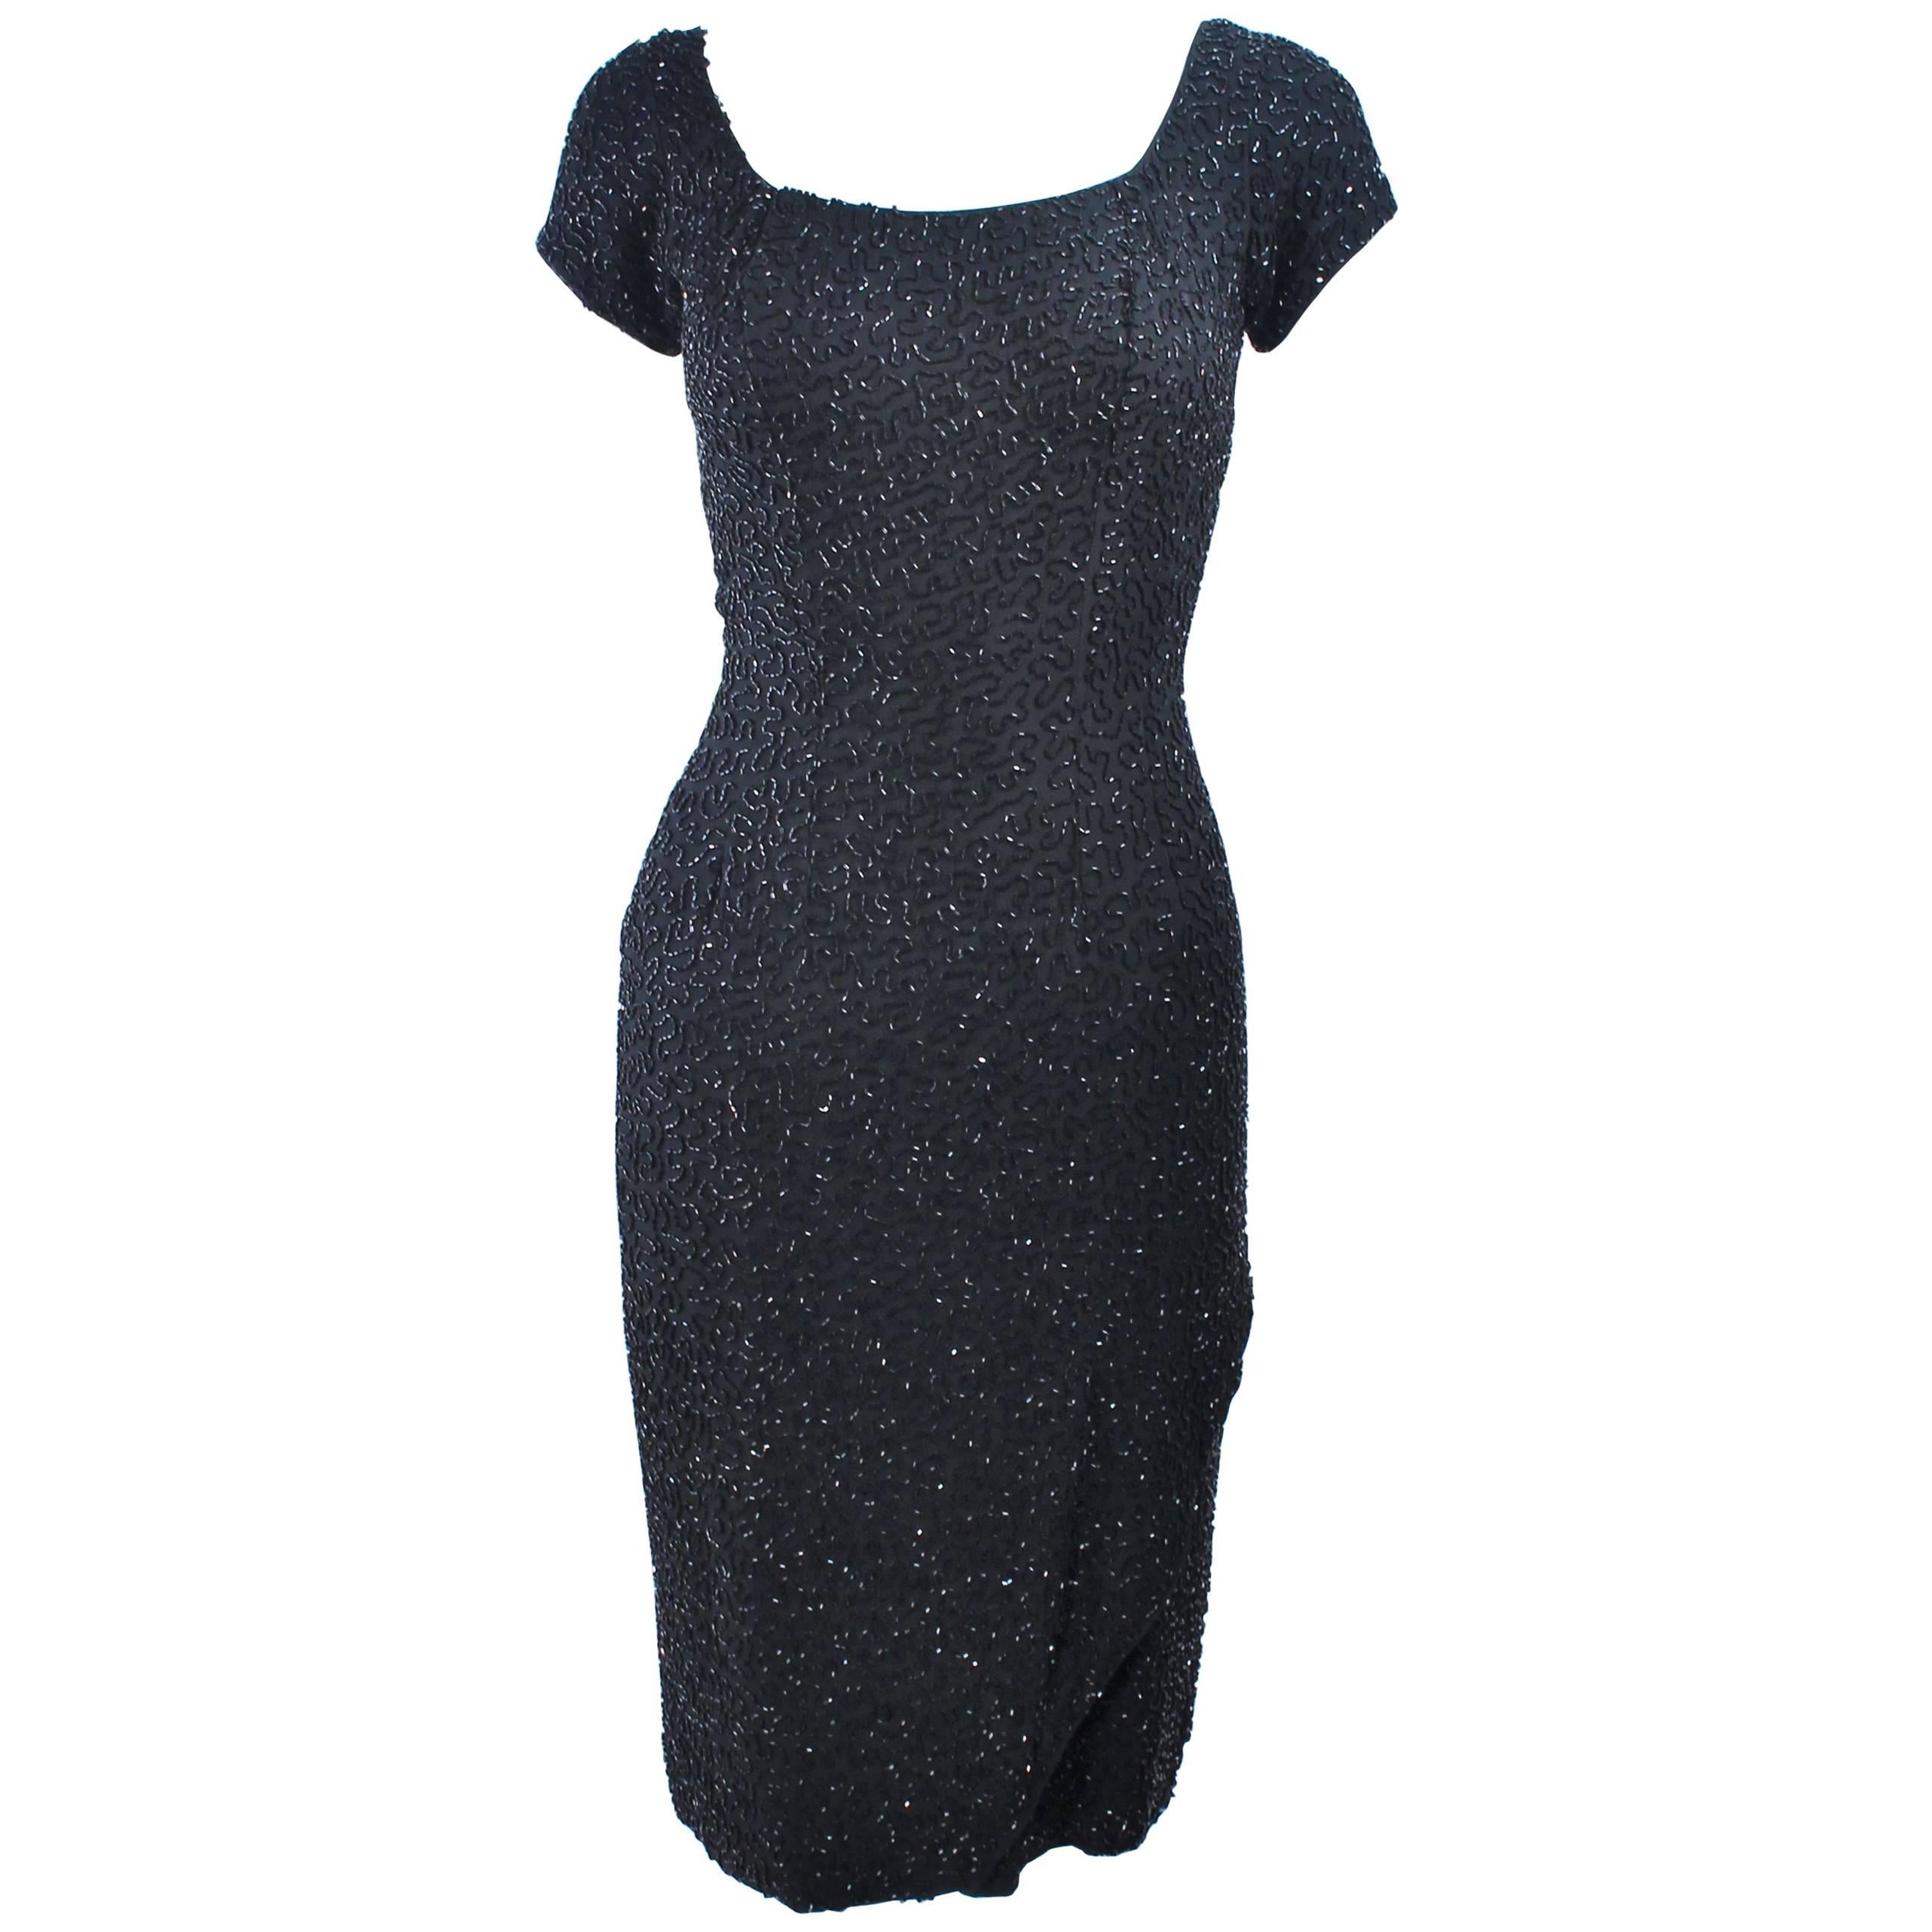 CEIL CHAPMAN 1960's Black Hand Beaded Silk Cocktail Dress with Drape Size 4  For Sale